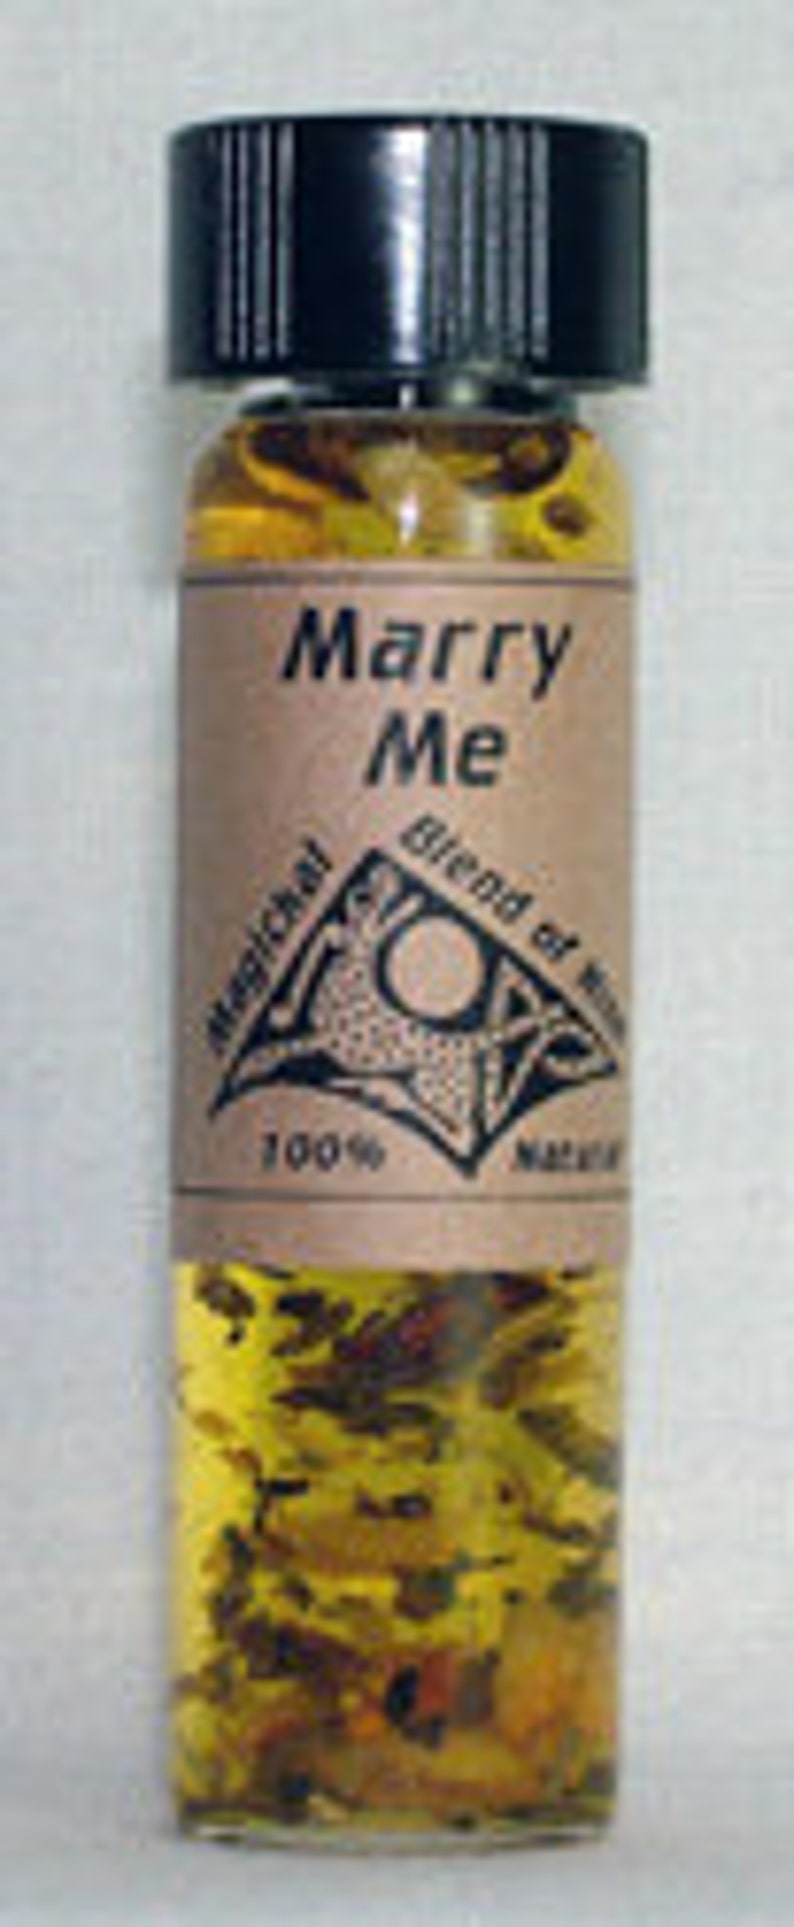 Marry Me Magical Oil Candleburning, Magick Spells, Witchcraft, Wicca, Hermetic, Pagan, Hoodoo, Voodoo, Voudun, Santeria, Occult image 1